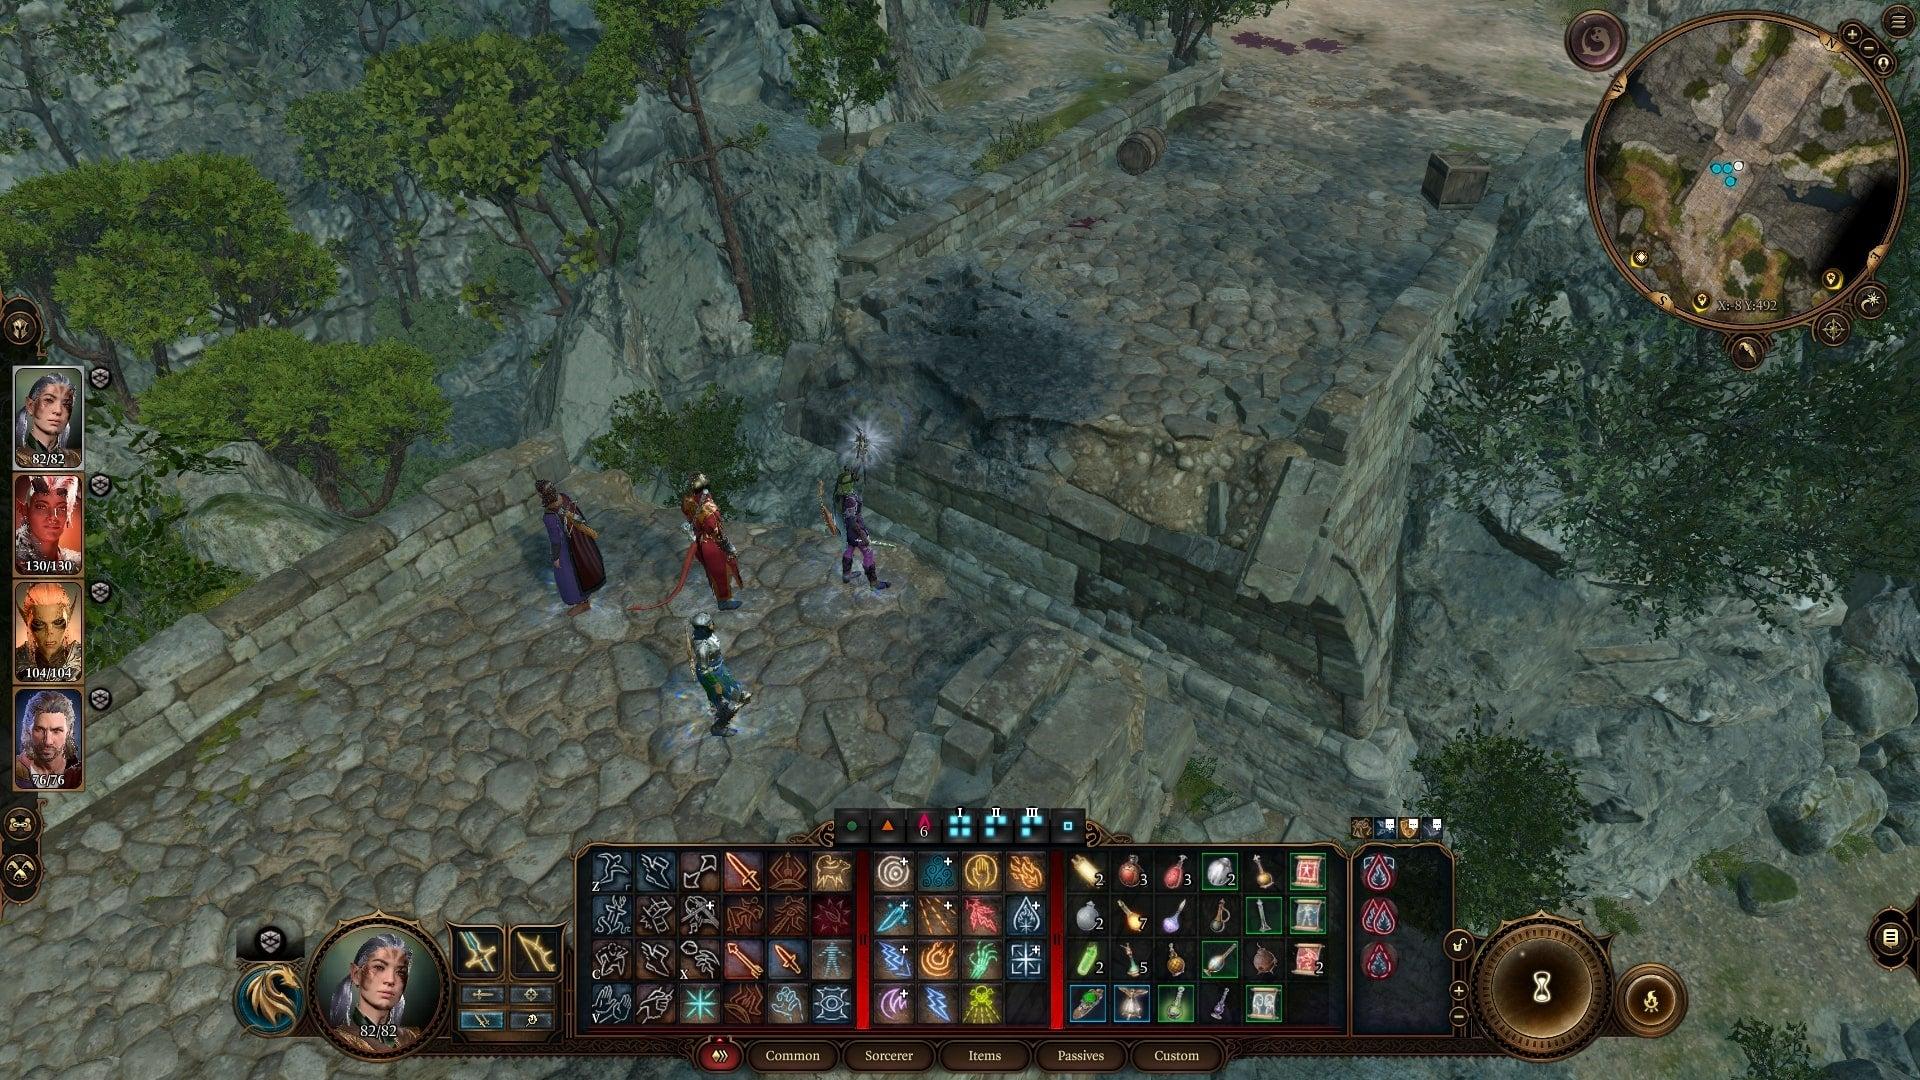 The player party stands on a broken bridge in the forest near Blighted Village in Baldur